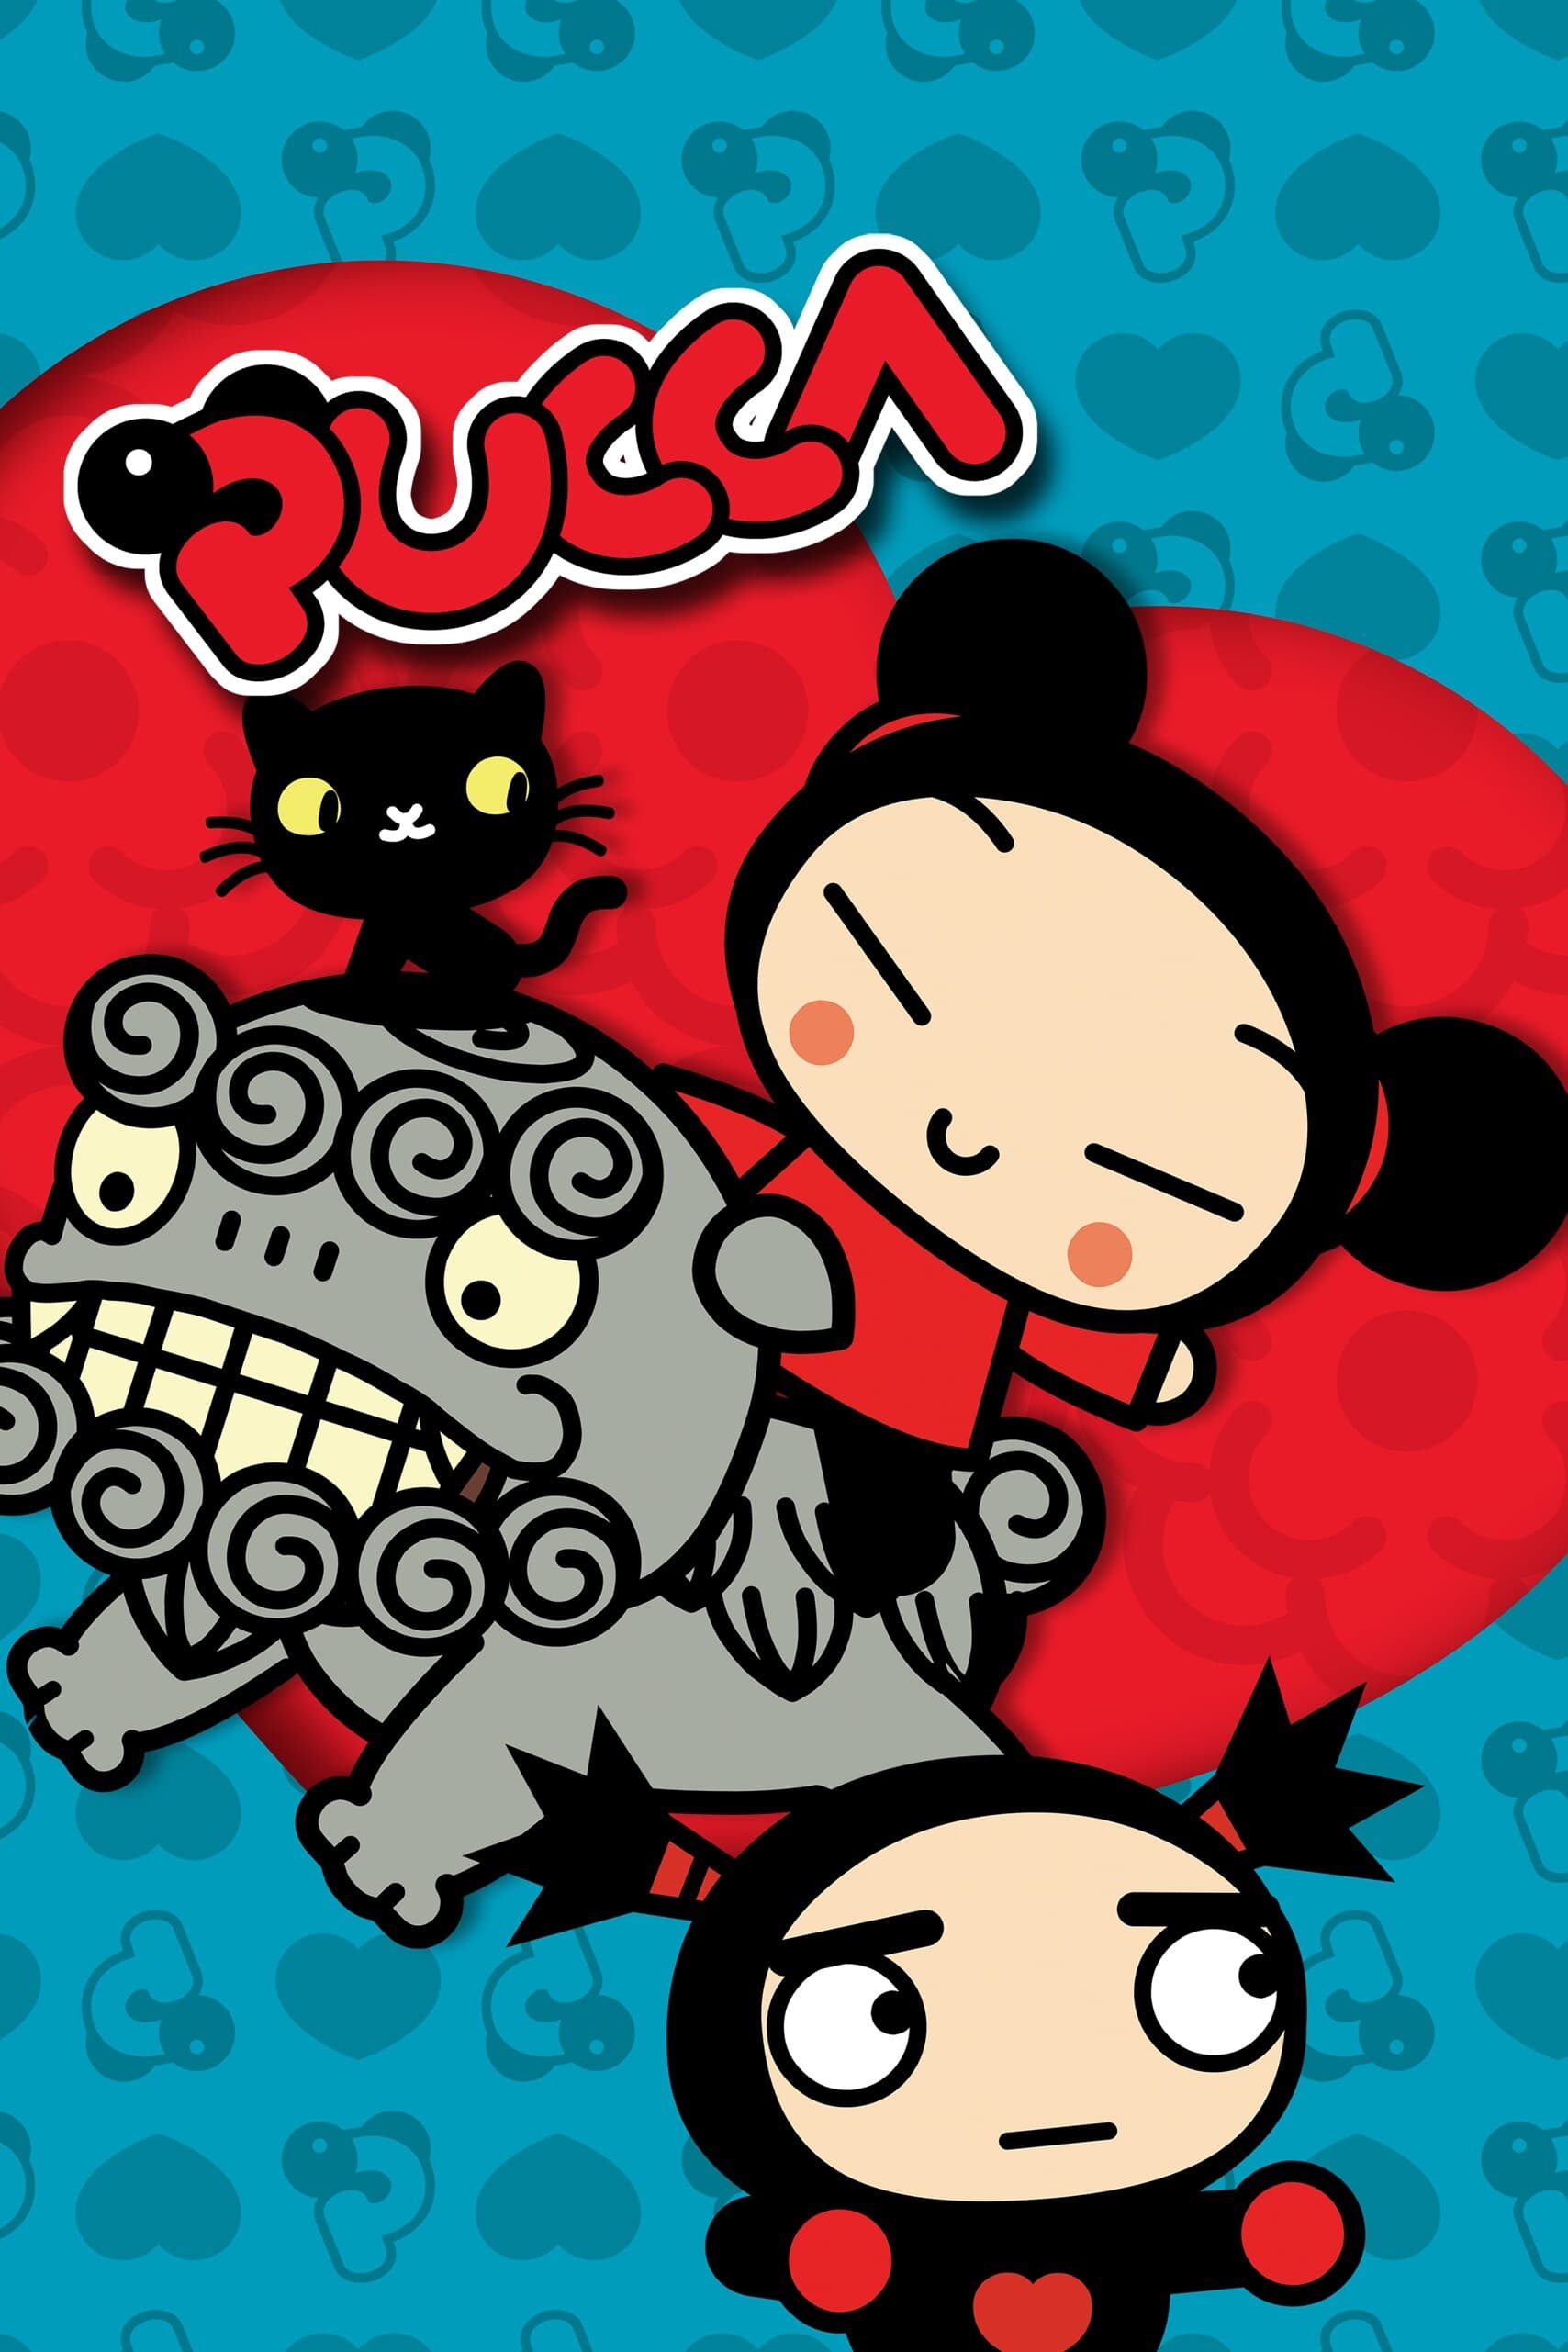 Pucca (2006)